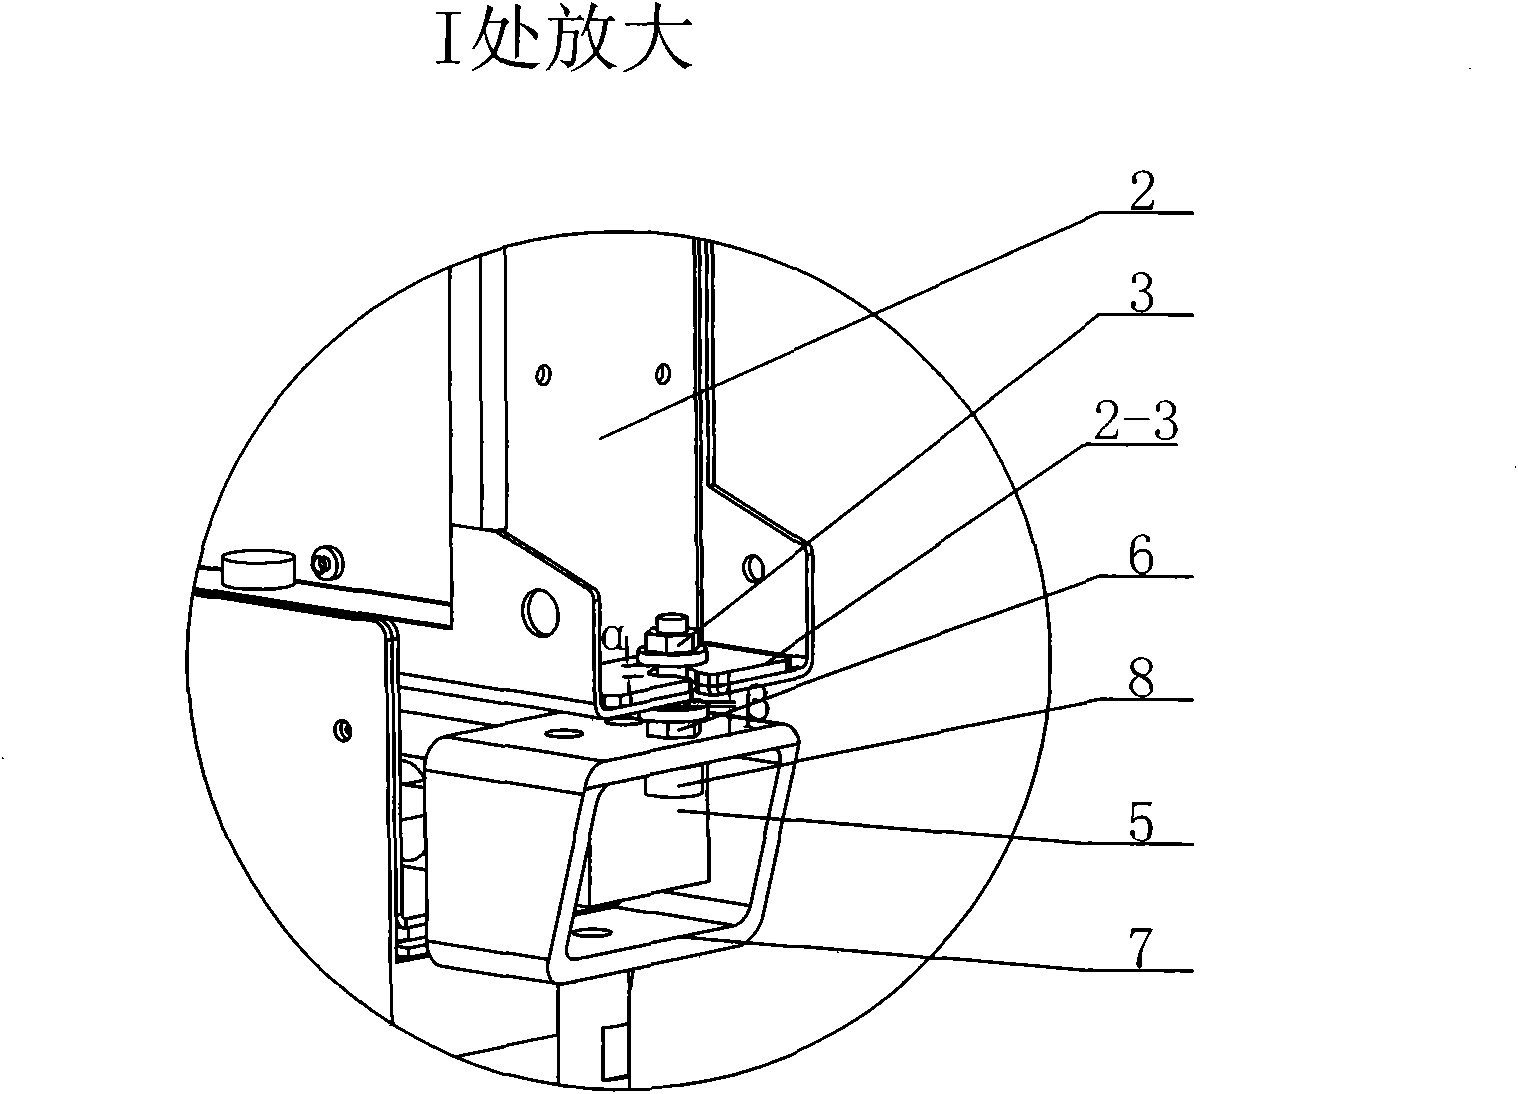 Weighing force transmission mechanism of hanging scale